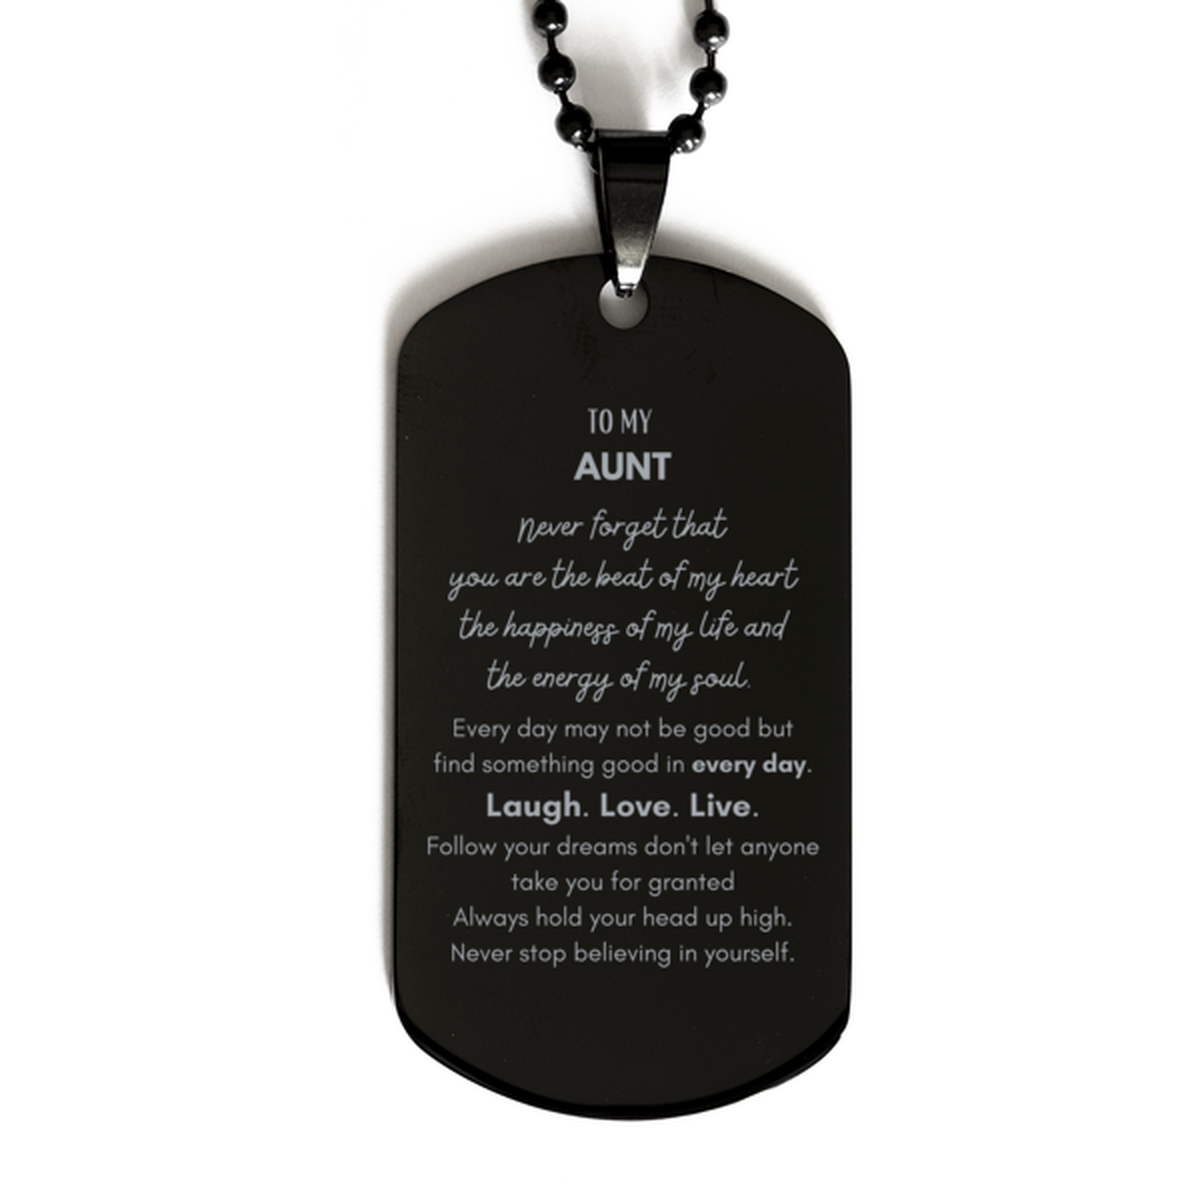 To My Aunt Dogtag Gifts, Christmas Aunt Black Dog Tag Present, Birthday Unique Motivational For Aunt, To My Aunt Never forget that you are the beat of my heart the happiness of my life and the energy of my soul